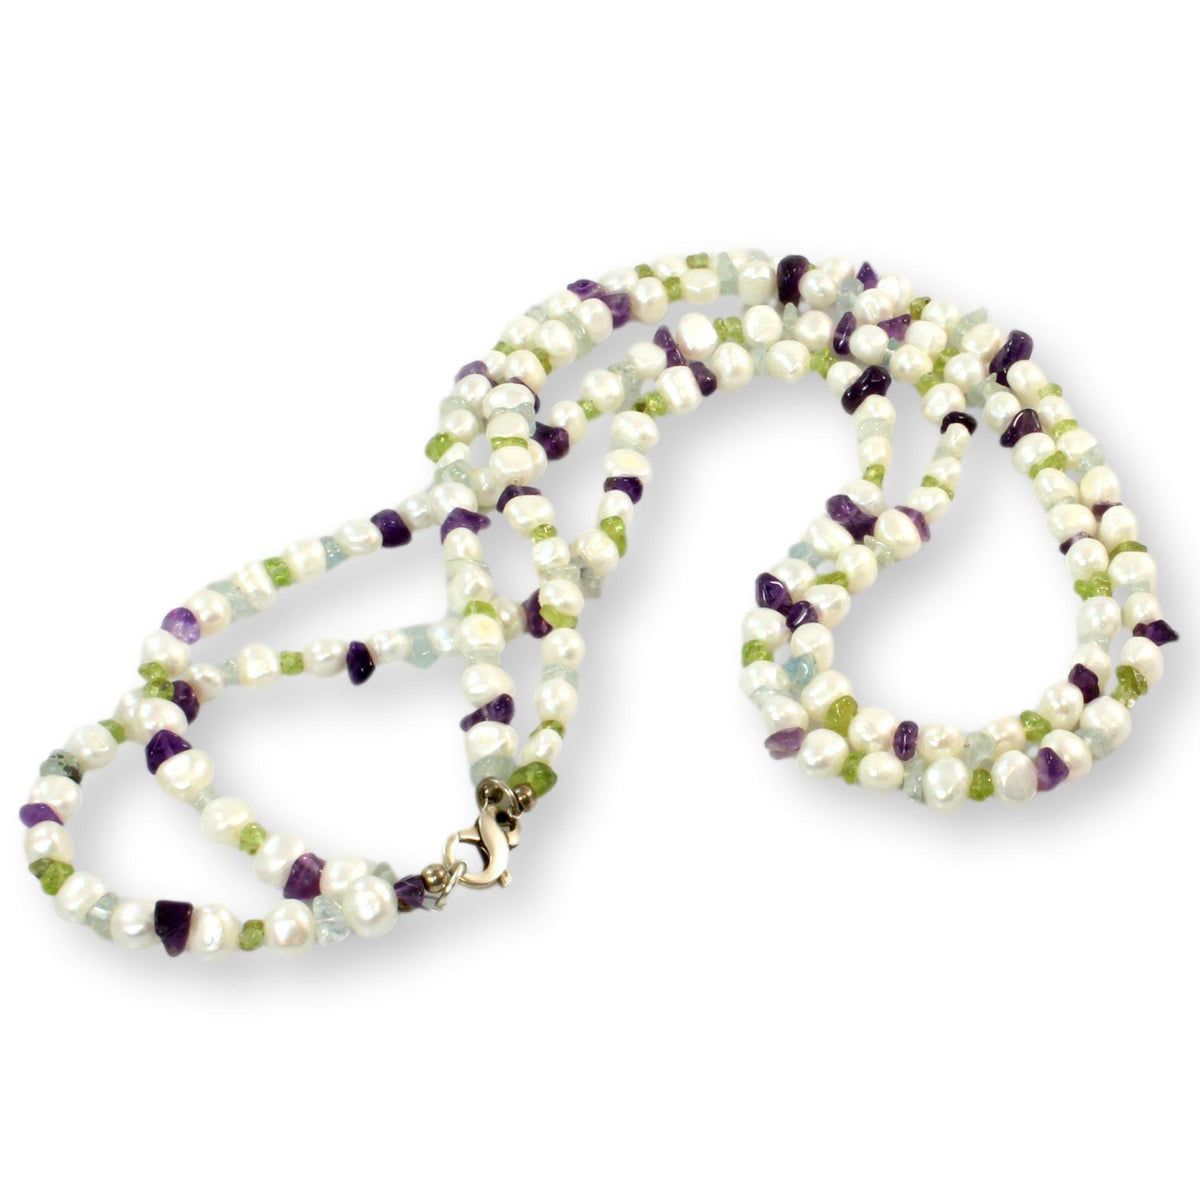 Cultured Pearl, Amethyst, Peridot, Aquamarine Double Strand Necklace